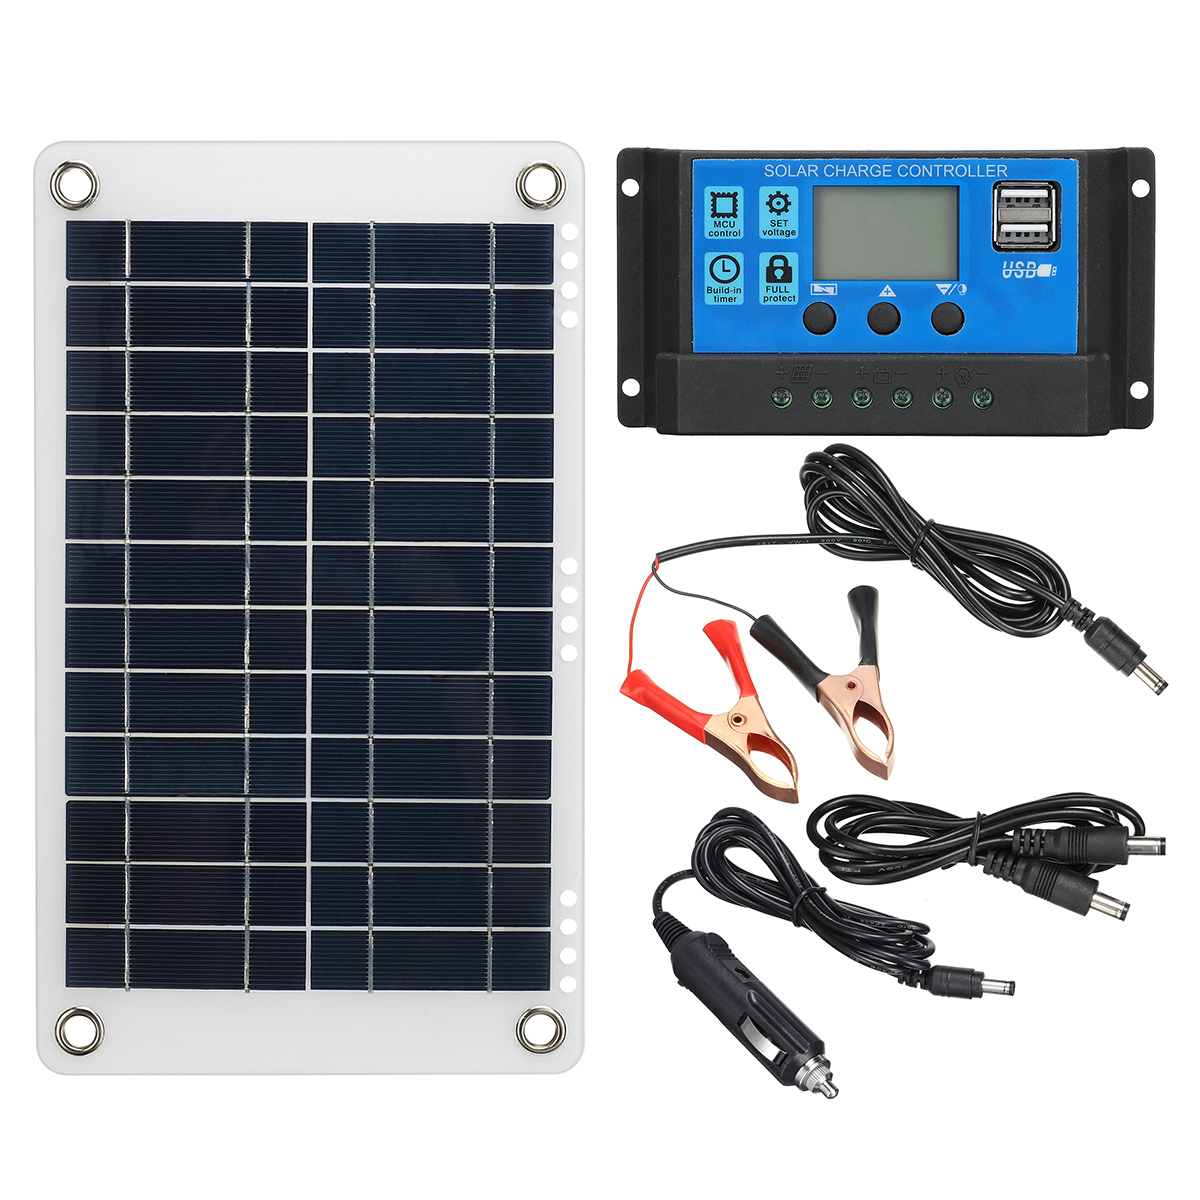 30W-Solar-Panel-Kit-12V-10A-Battery-Charger-Controller-Caravan-Boat-Outdoor-1909239-1